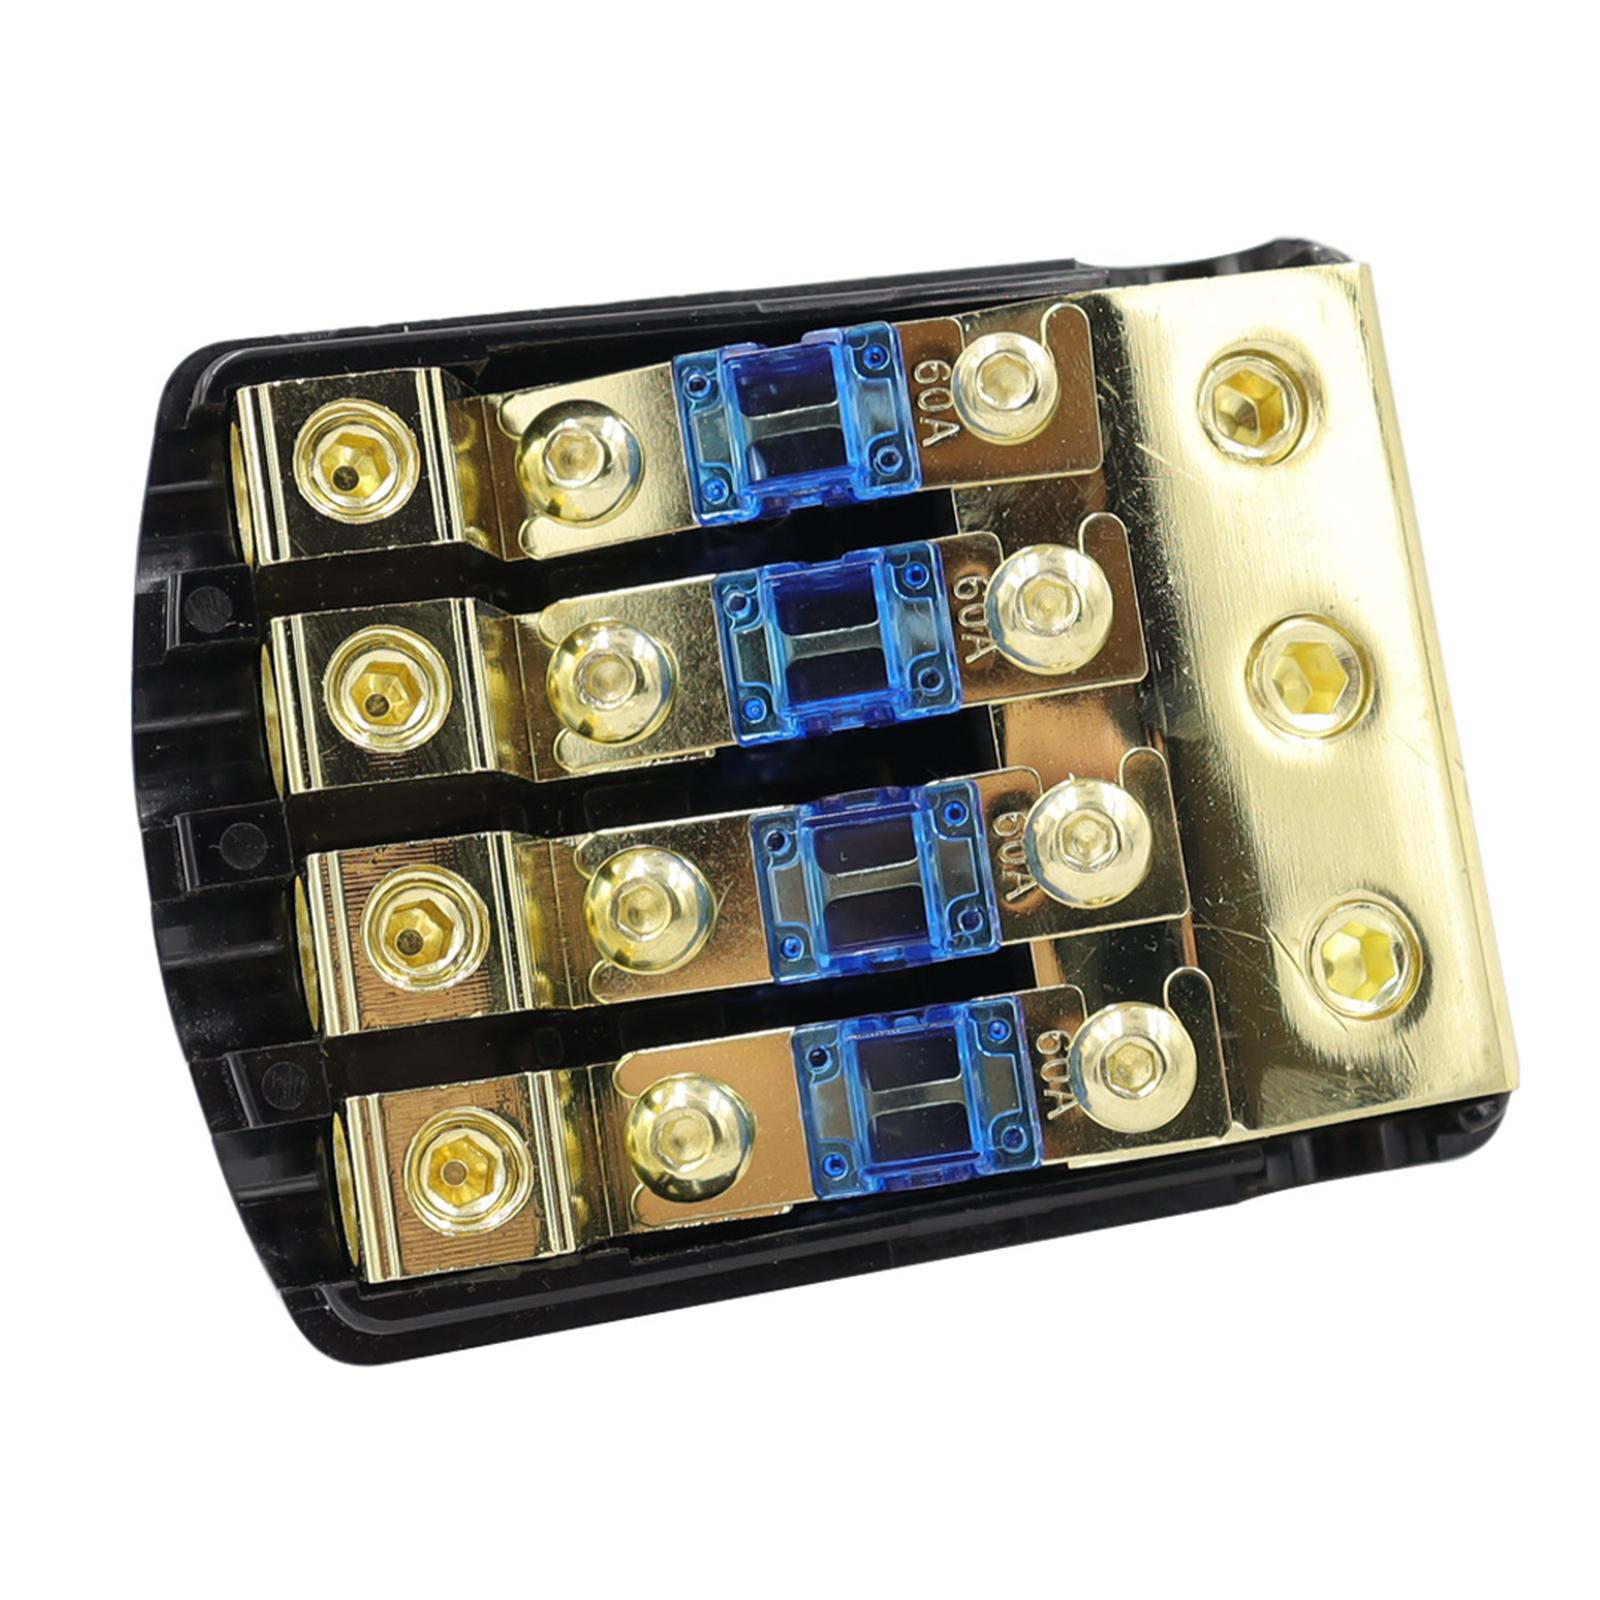 4 Way Fuse Holder Replacement 60A Fuse Distribution Block for Car Audio